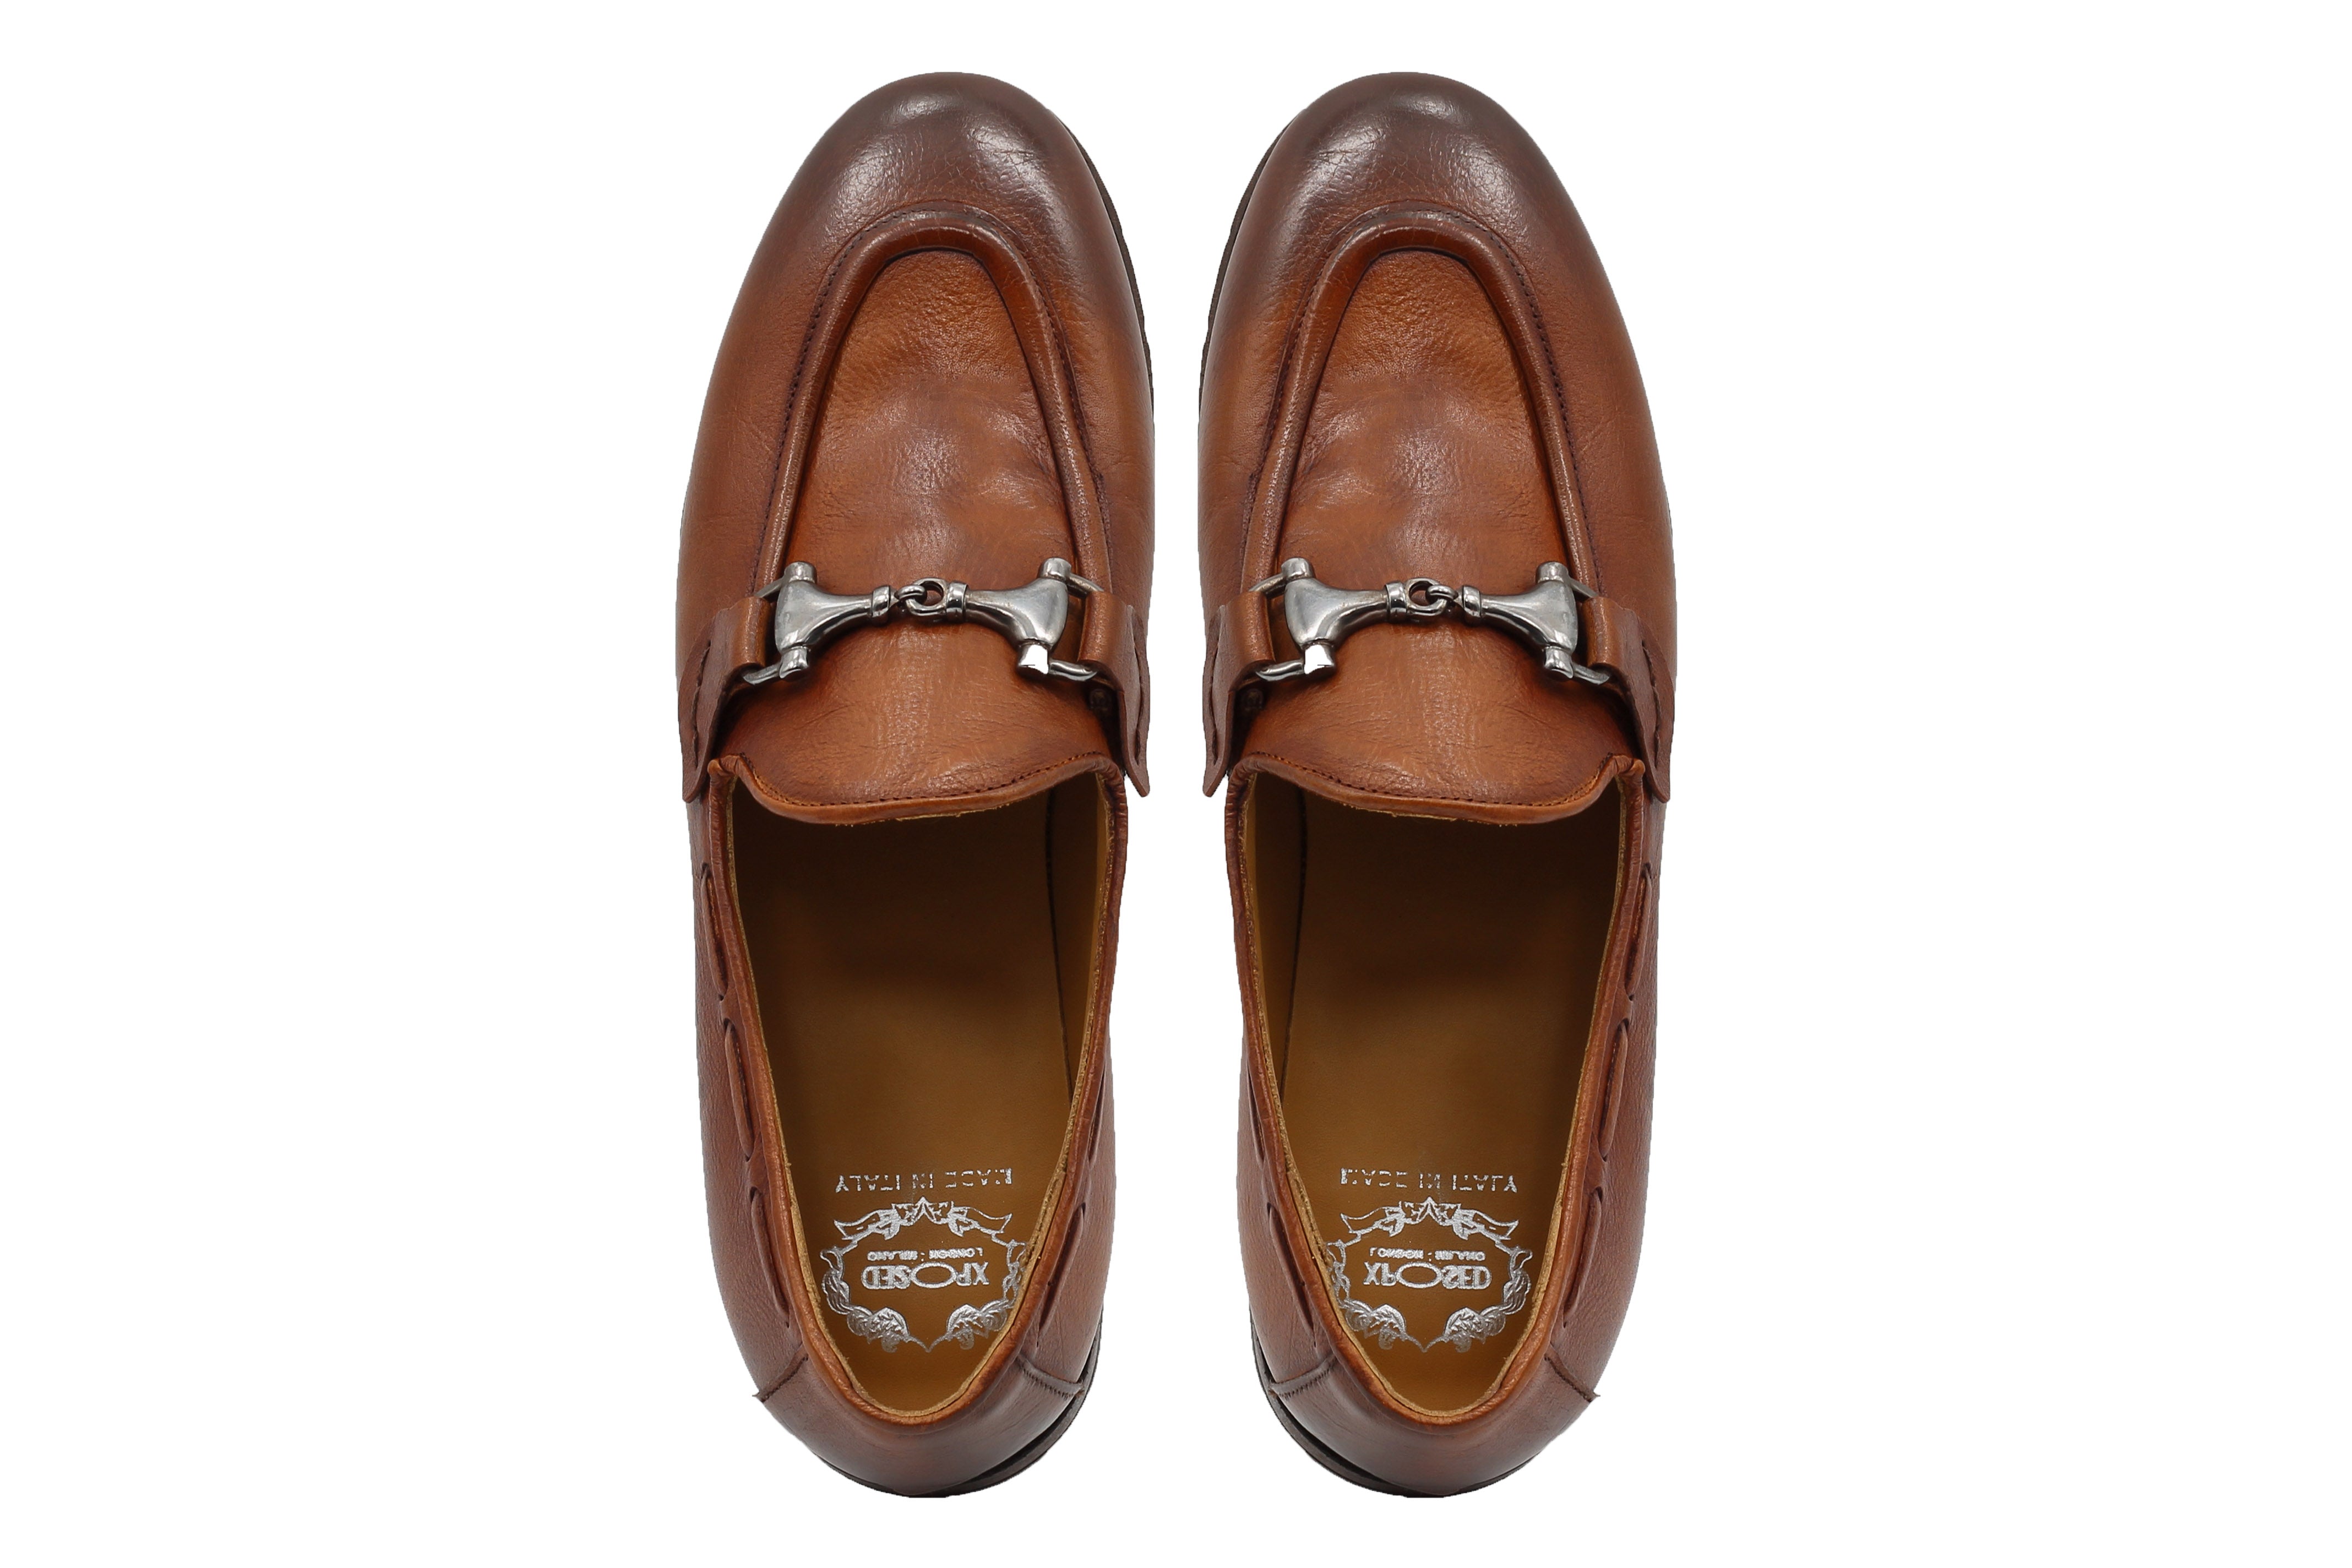 NAPLES 02 - ITALIAN LEATHER SNAFFLE BIT LOAFER IN TAN